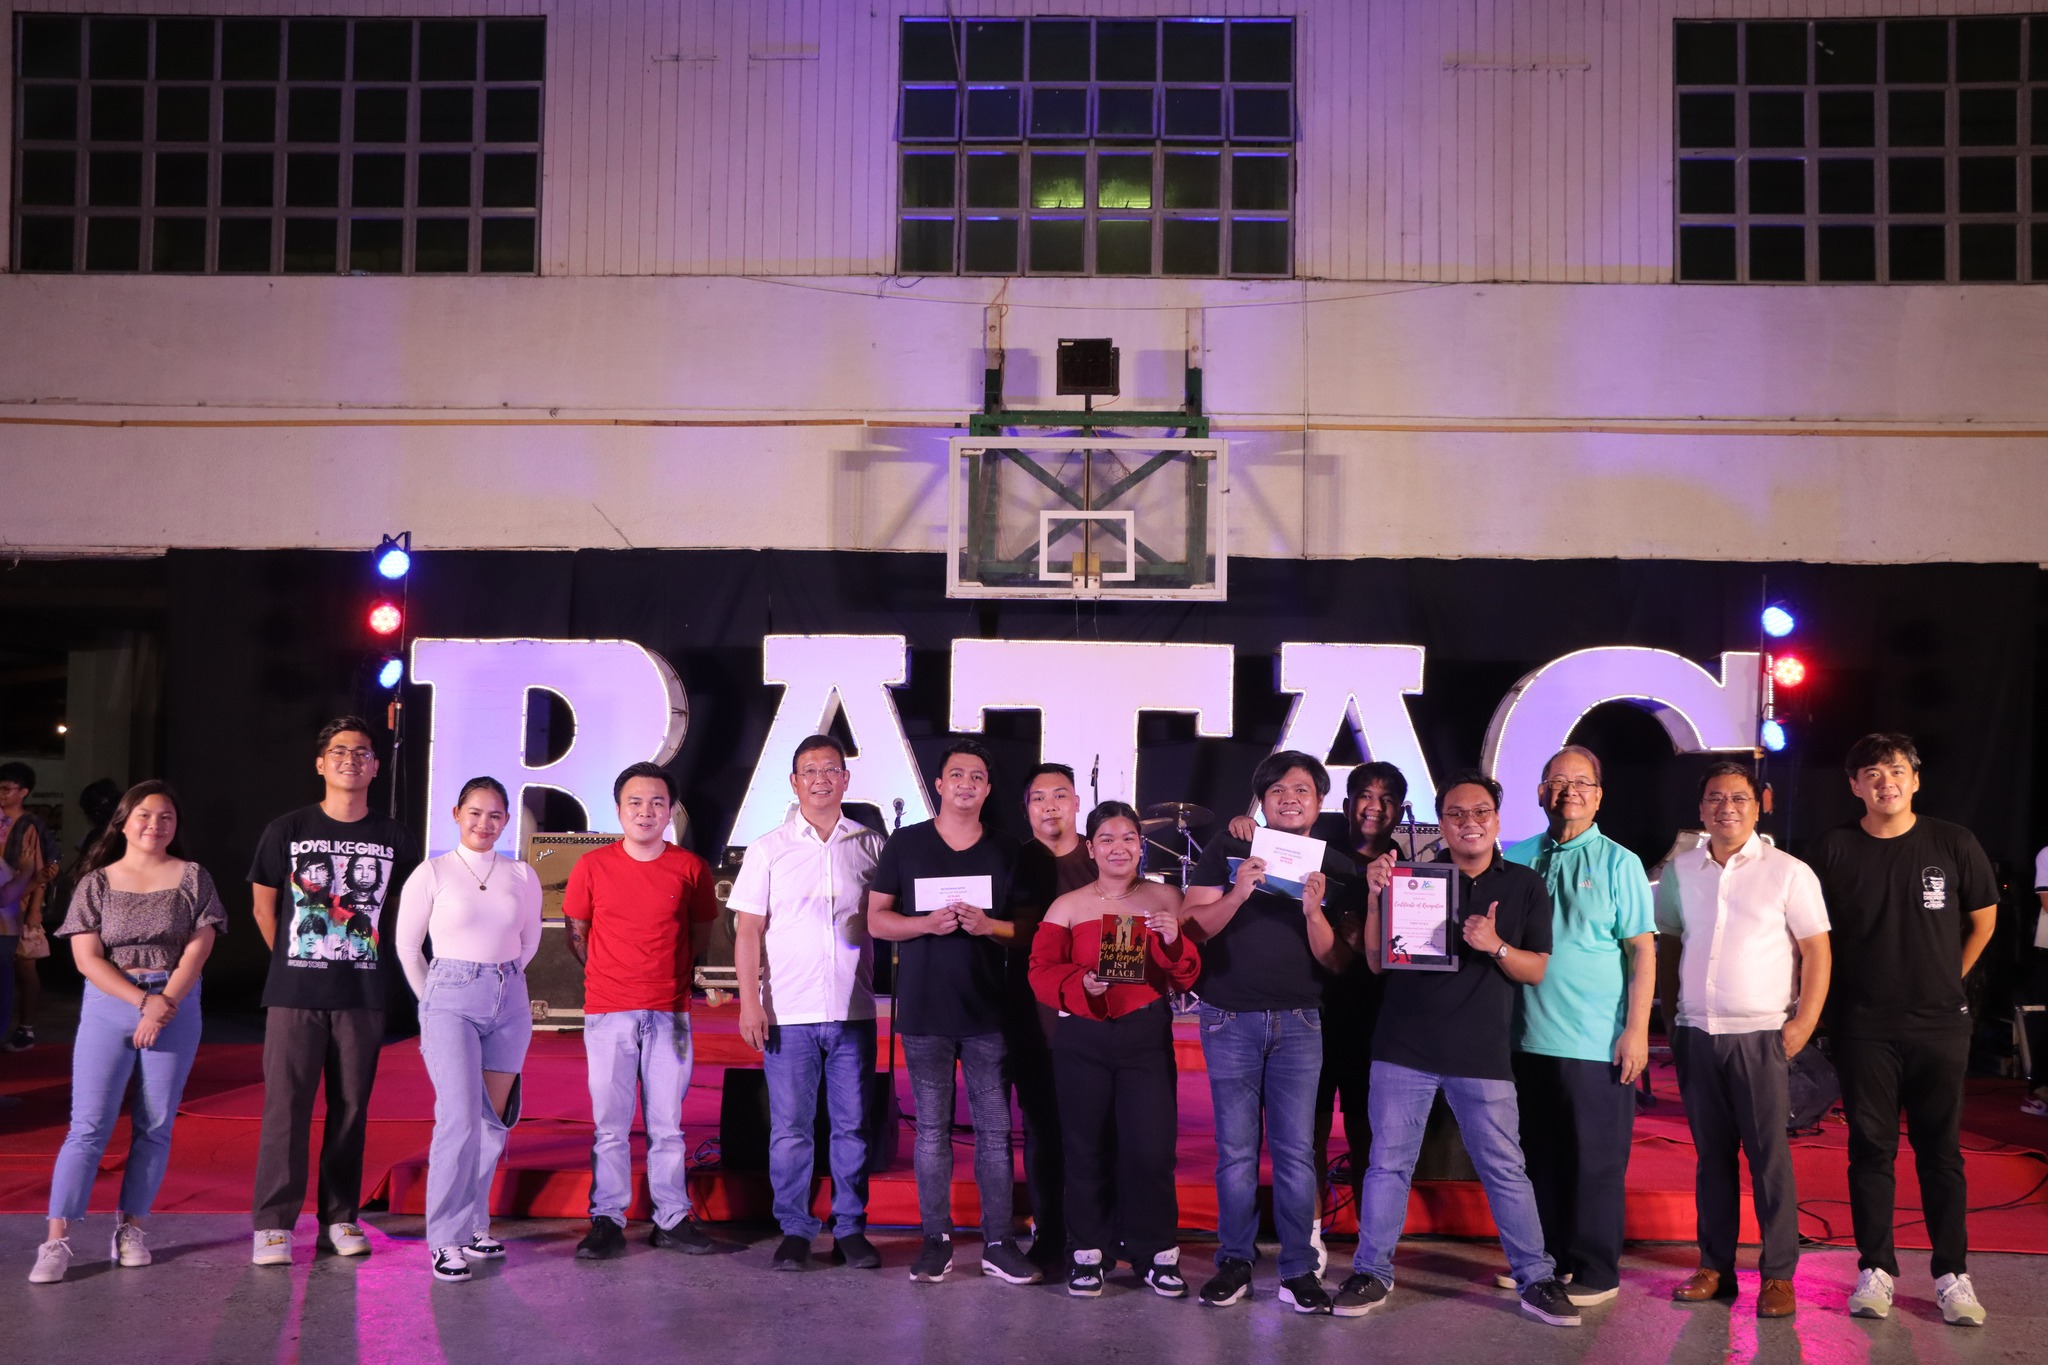 FIRST BATAKENNAK BATTLE OF THE BANDS, PRELUDES BATAC’S 16TH CHARTER ANNIVERSARY